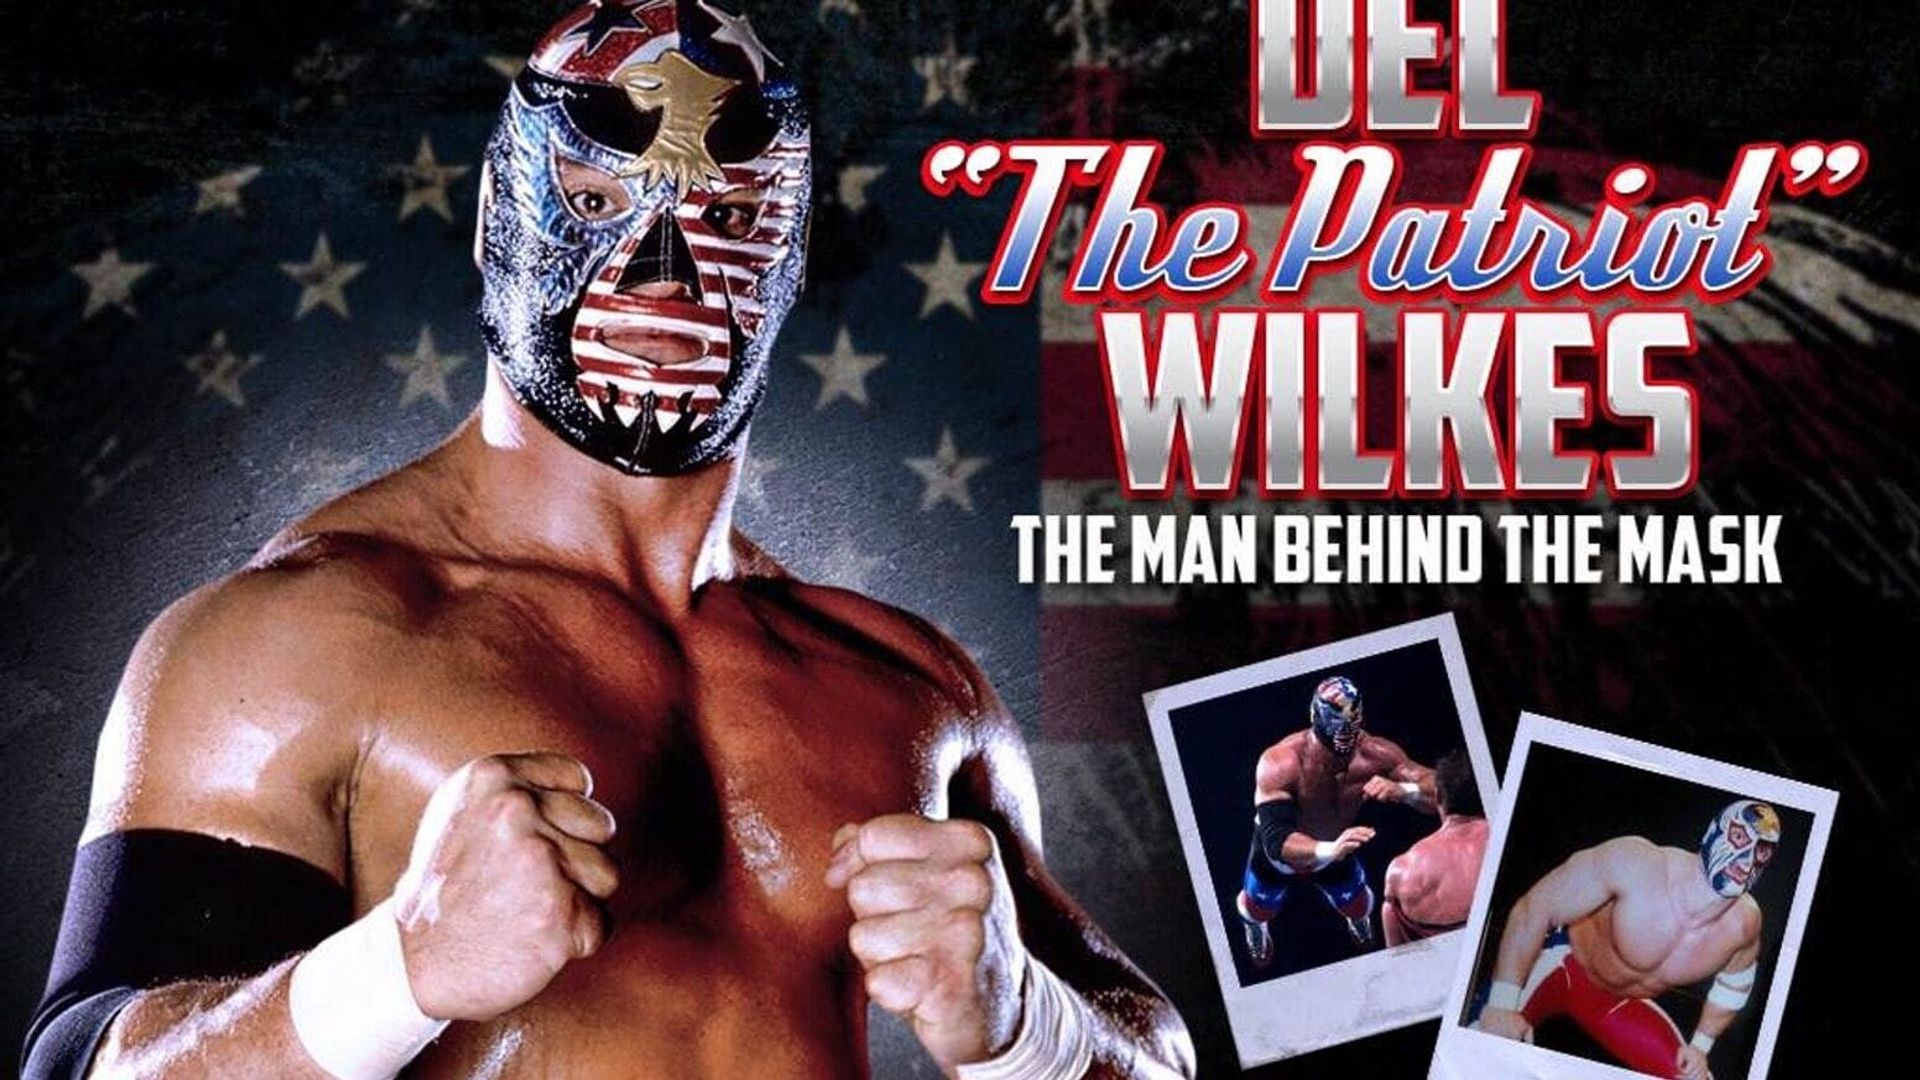 Behind the Mask: Del the Patriot Wilkes background